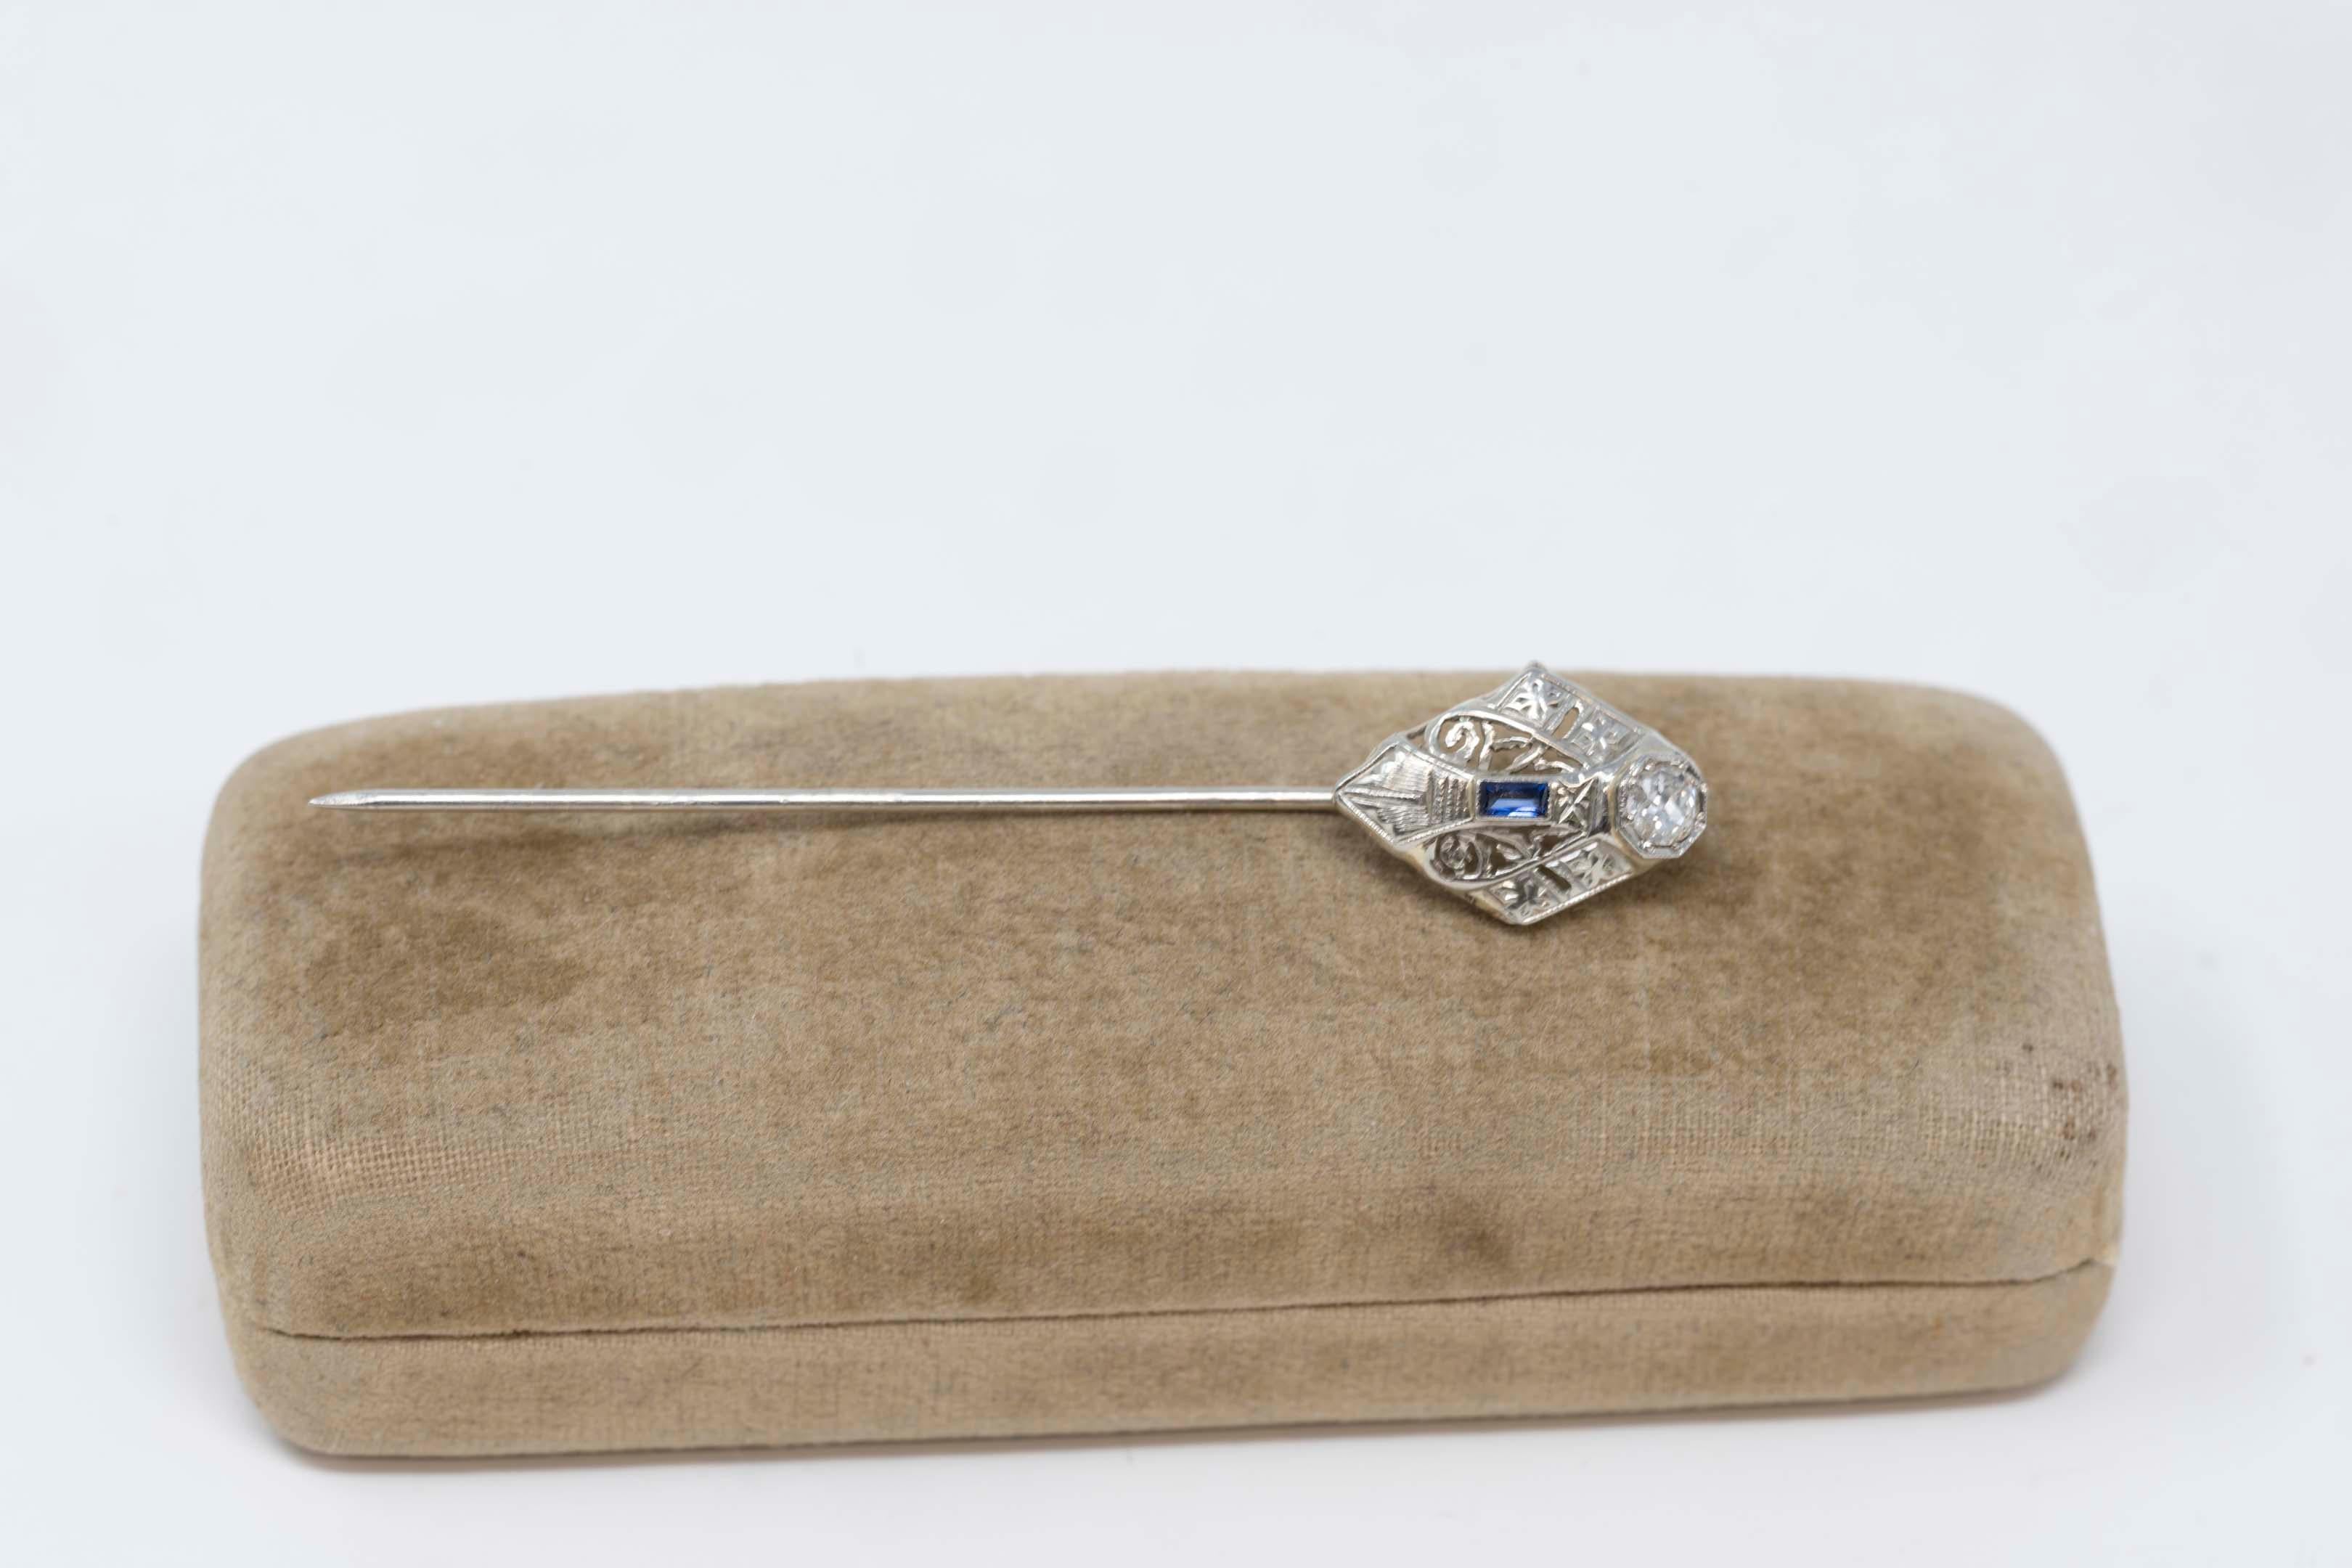 Women's Victorian 14k White Gold Diamond and Sapphire Pin For Sale